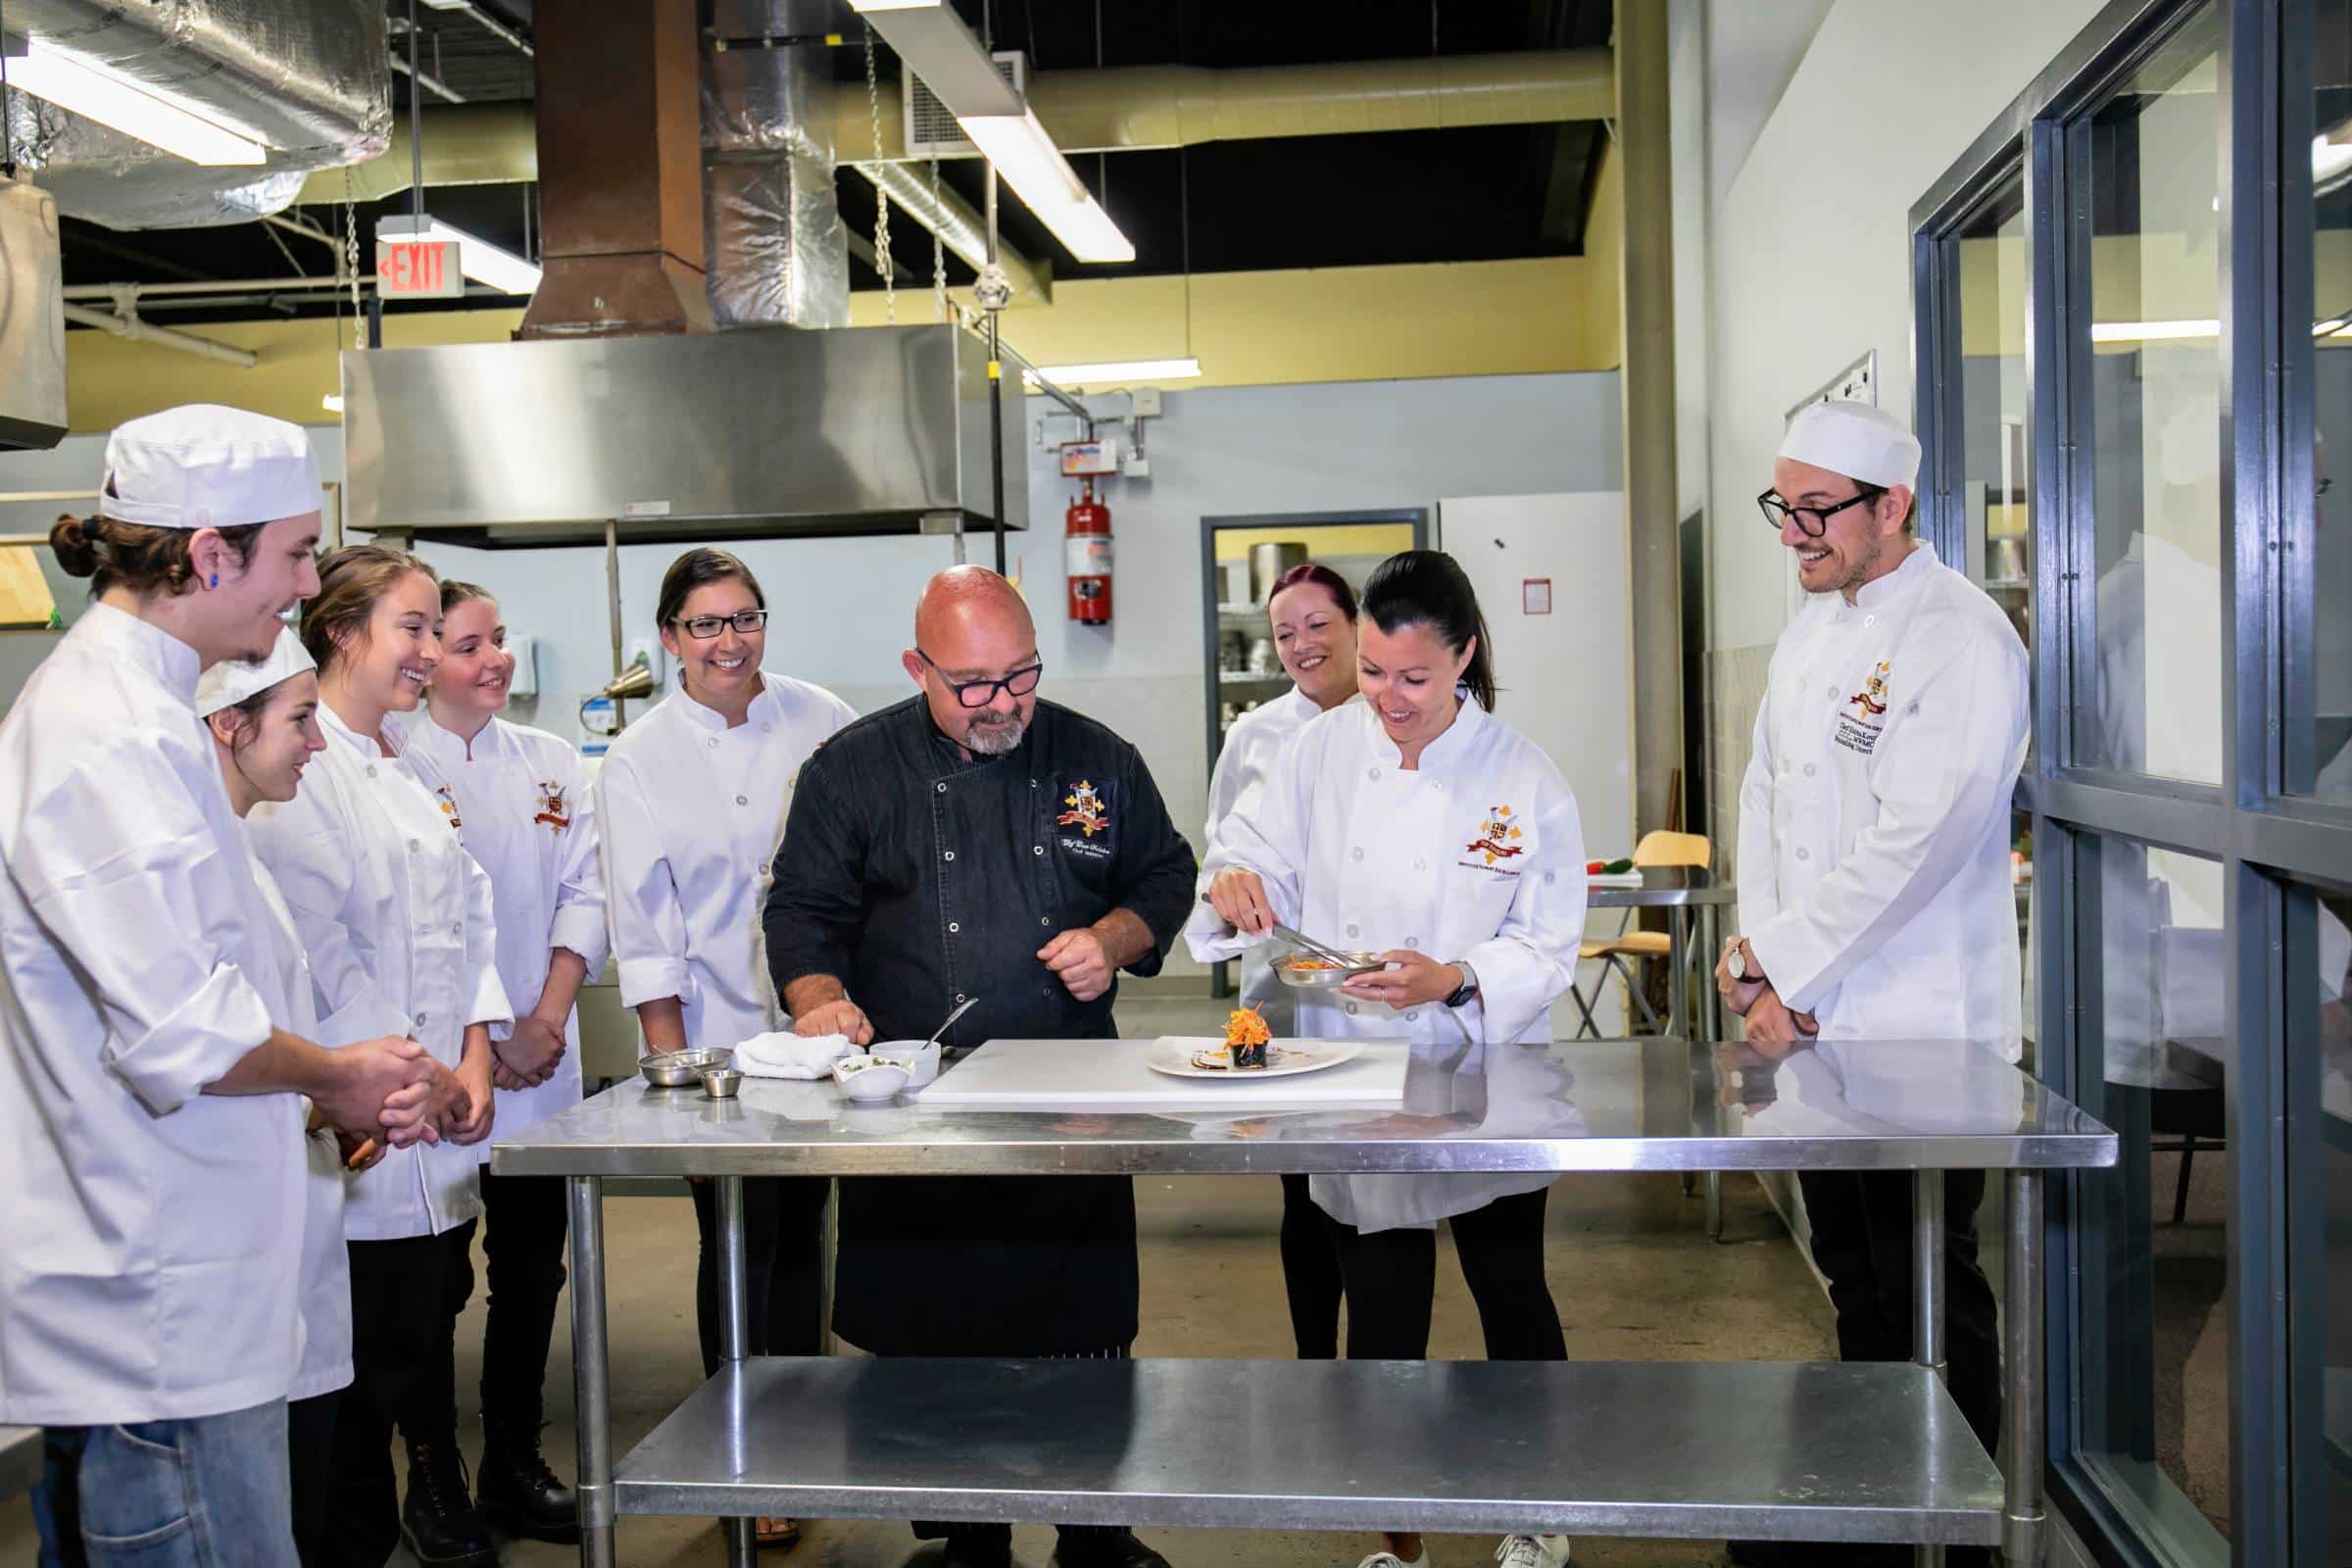 Hire Our Alumni - Image - Top Toques Institute of Culinary Excellence